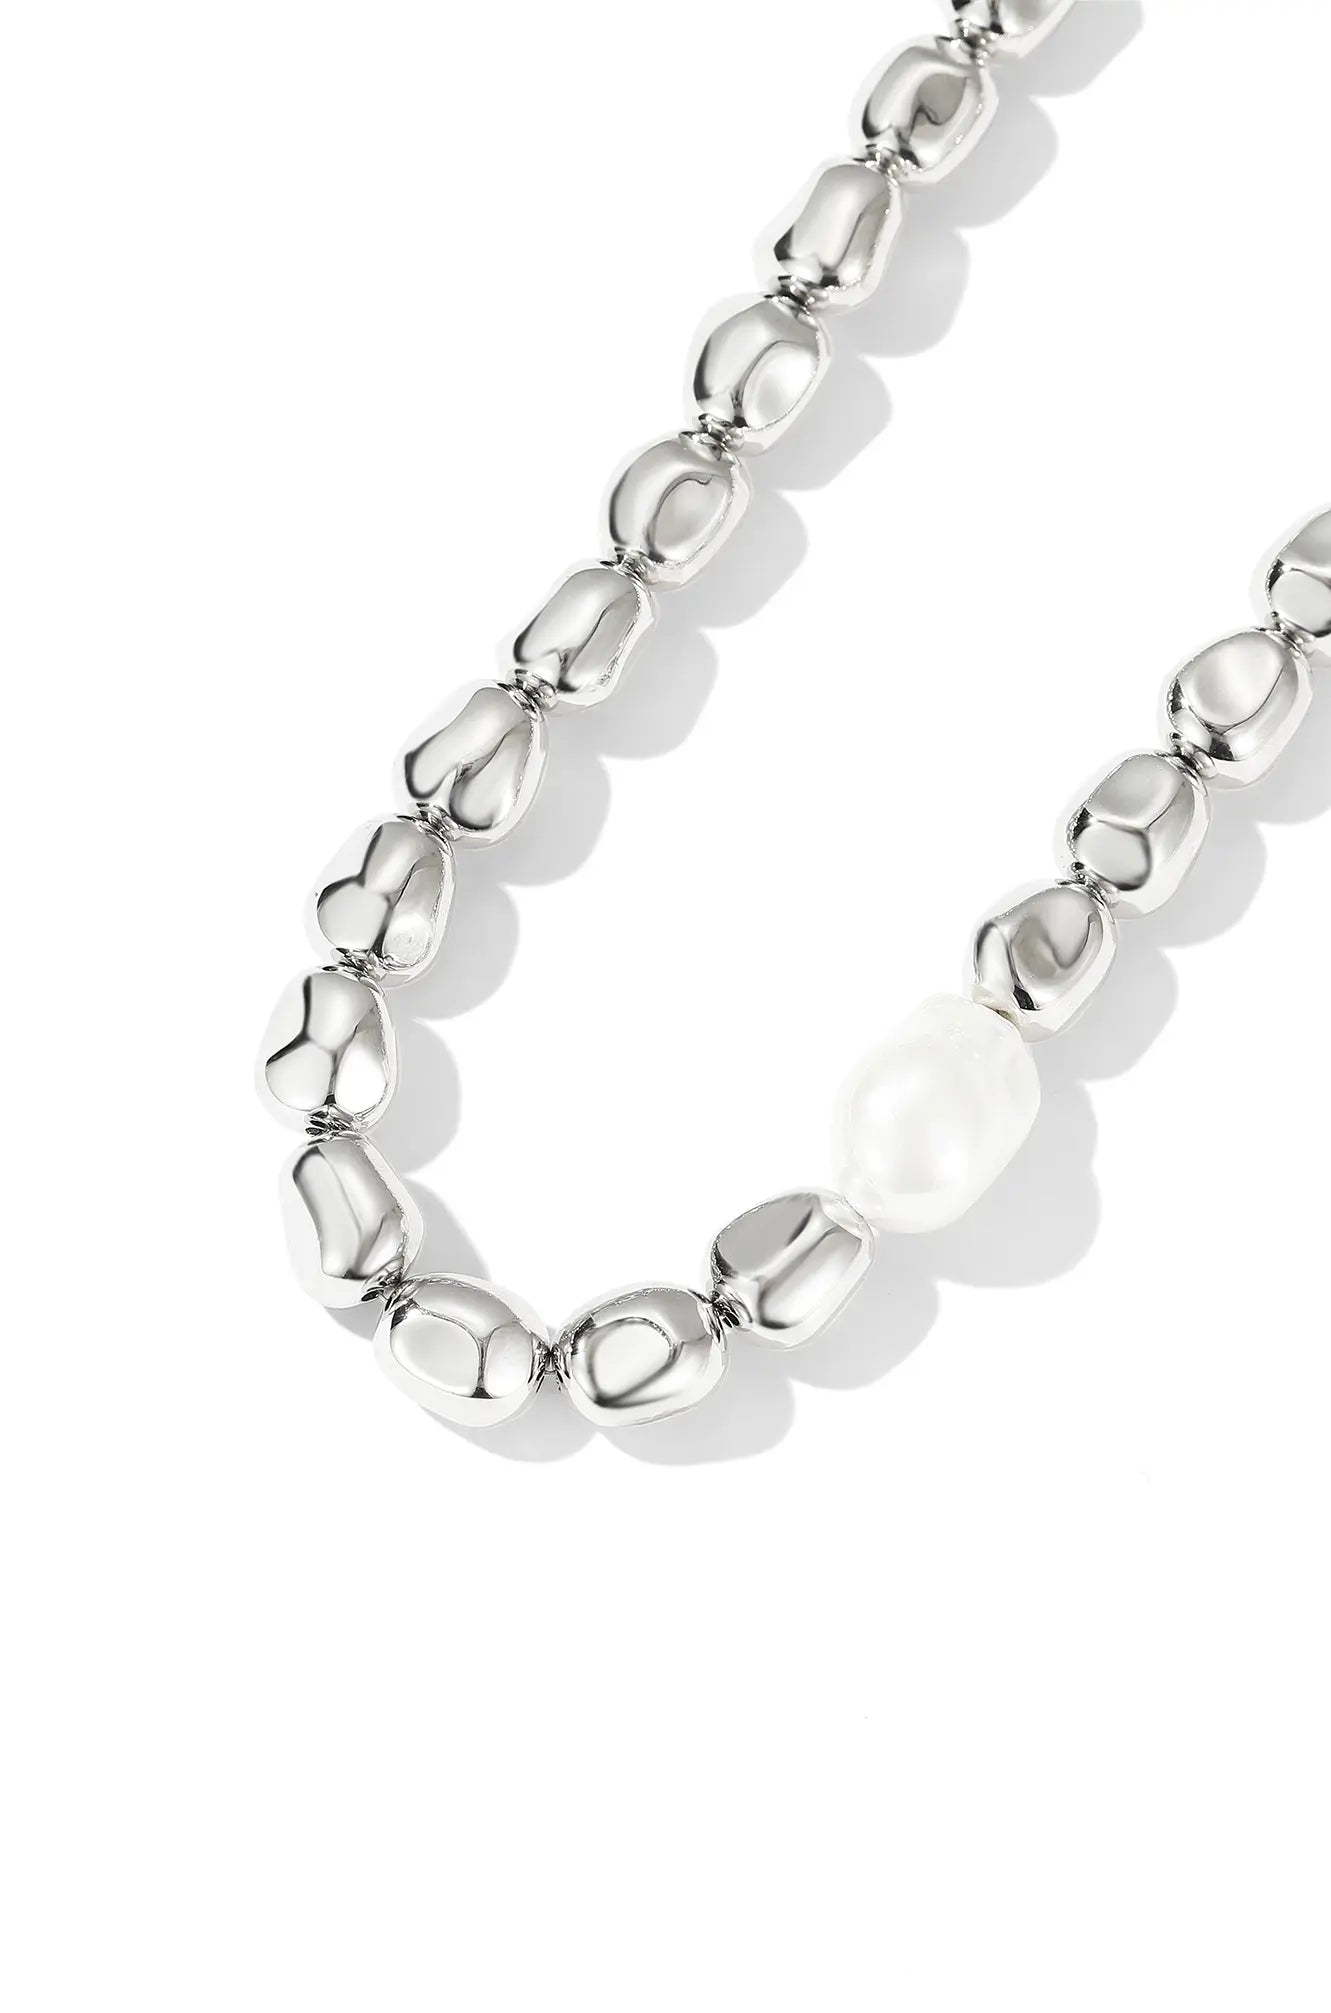 Polished Silver Bead Necklace